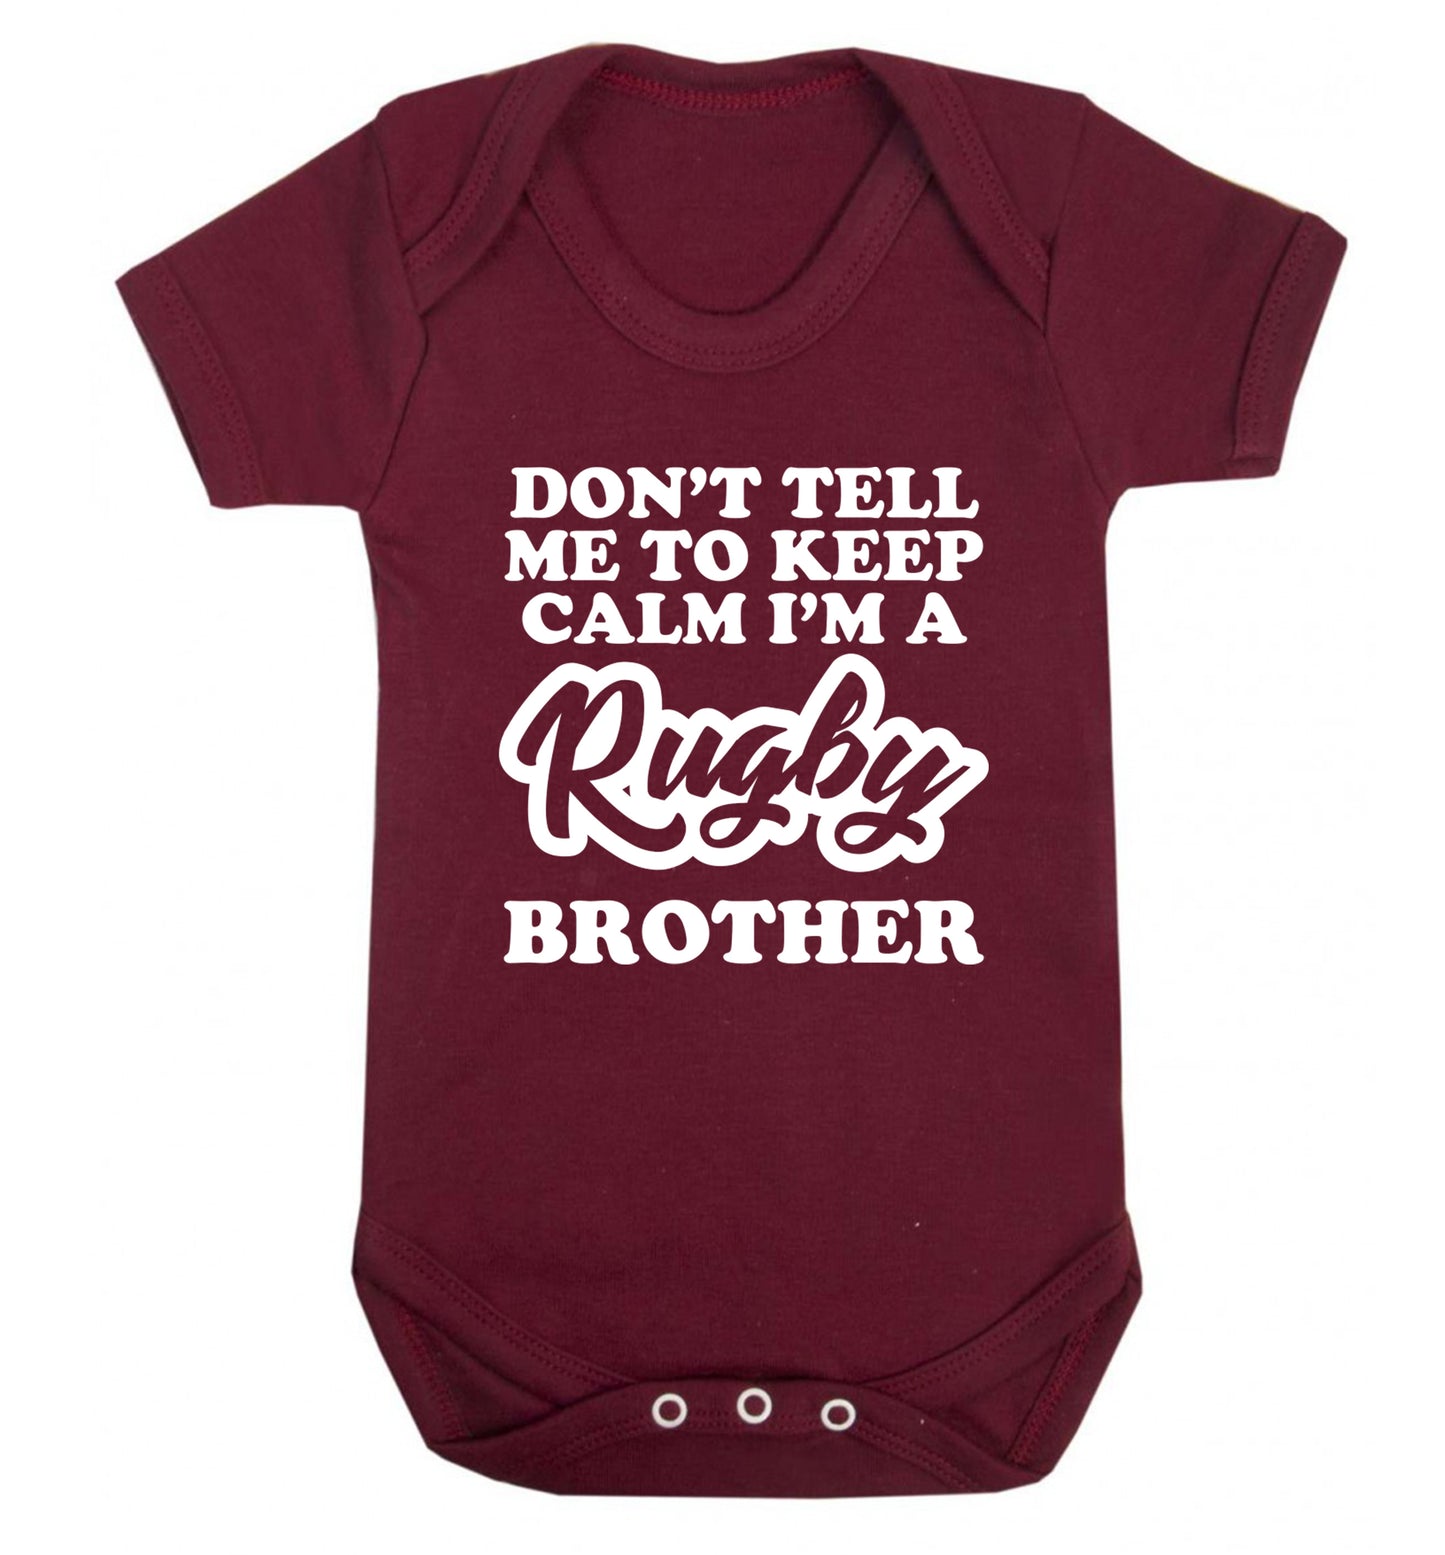 Don't tell me keep calm I'm a rugby brother Baby Vest maroon 18-24 months